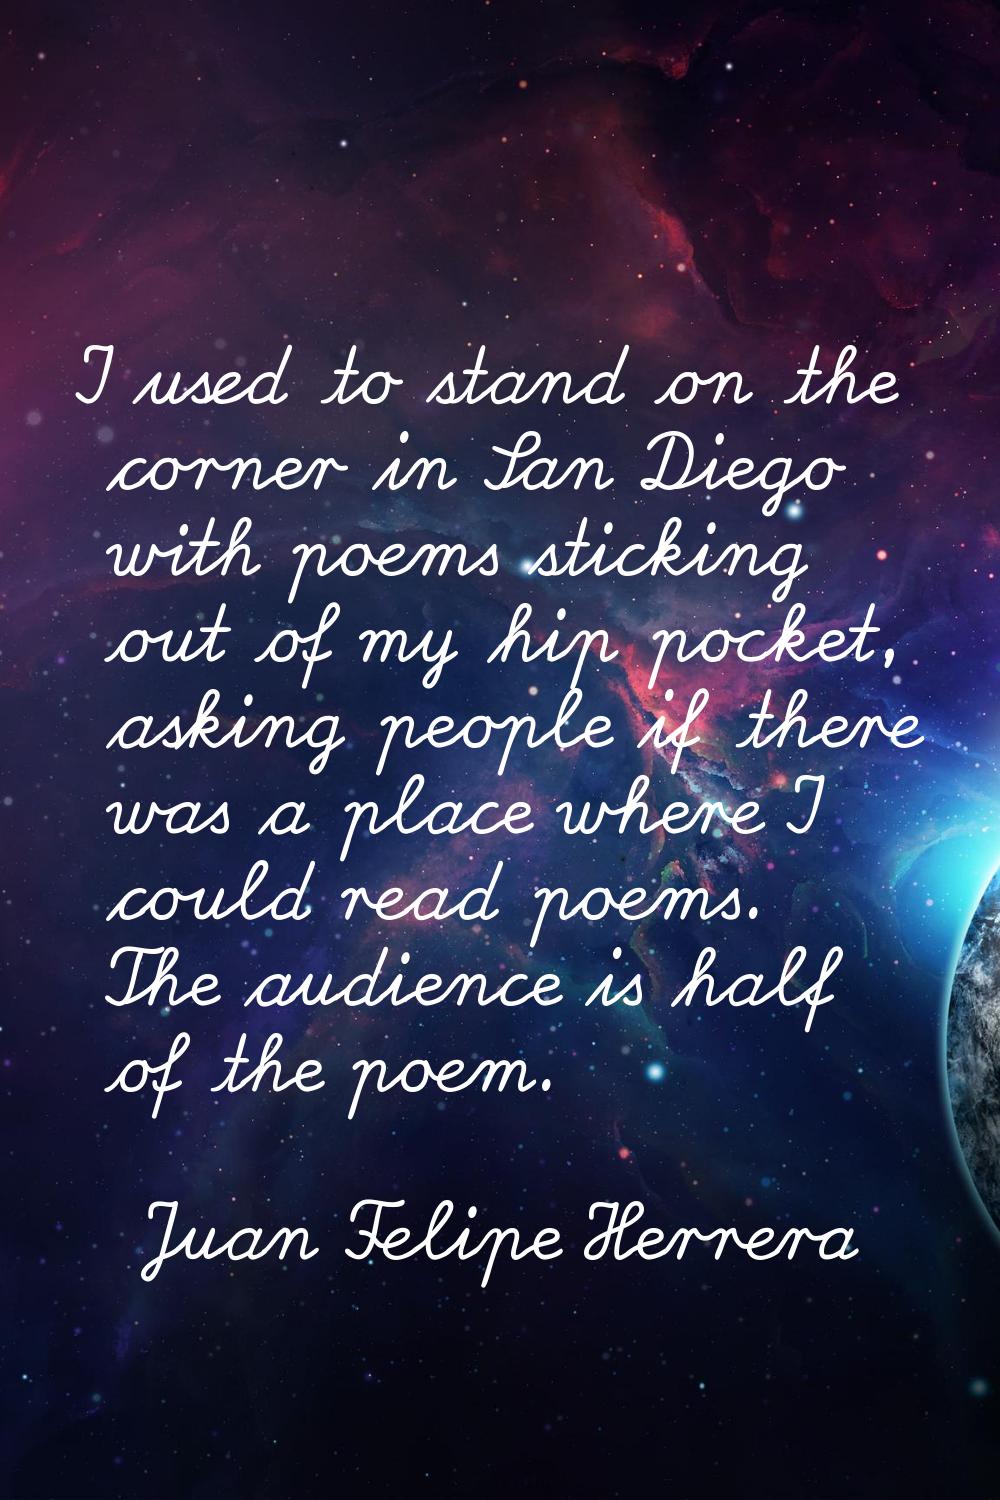 I used to stand on the corner in San Diego with poems sticking out of my hip pocket, asking people 